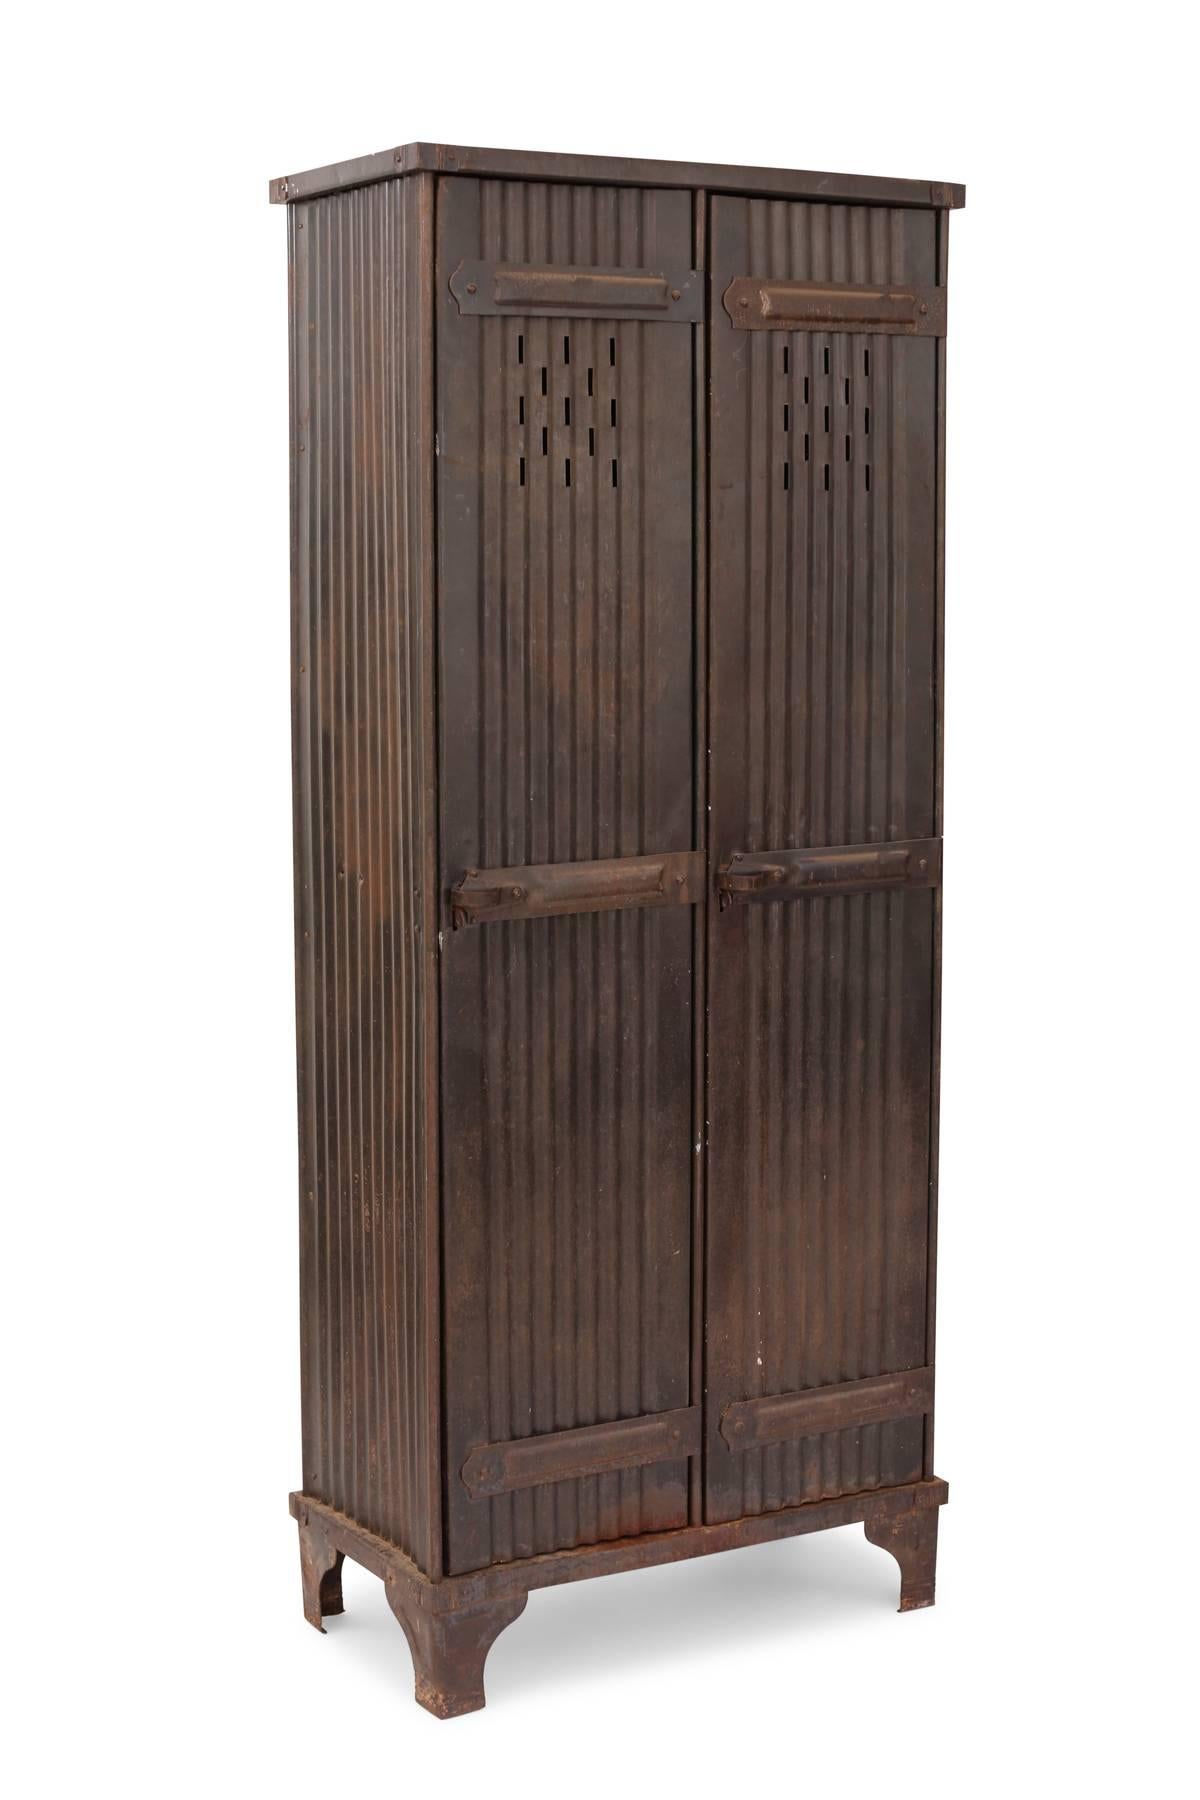 Mid-20th Century French Industrial Metal Storage Locker from the 1940s